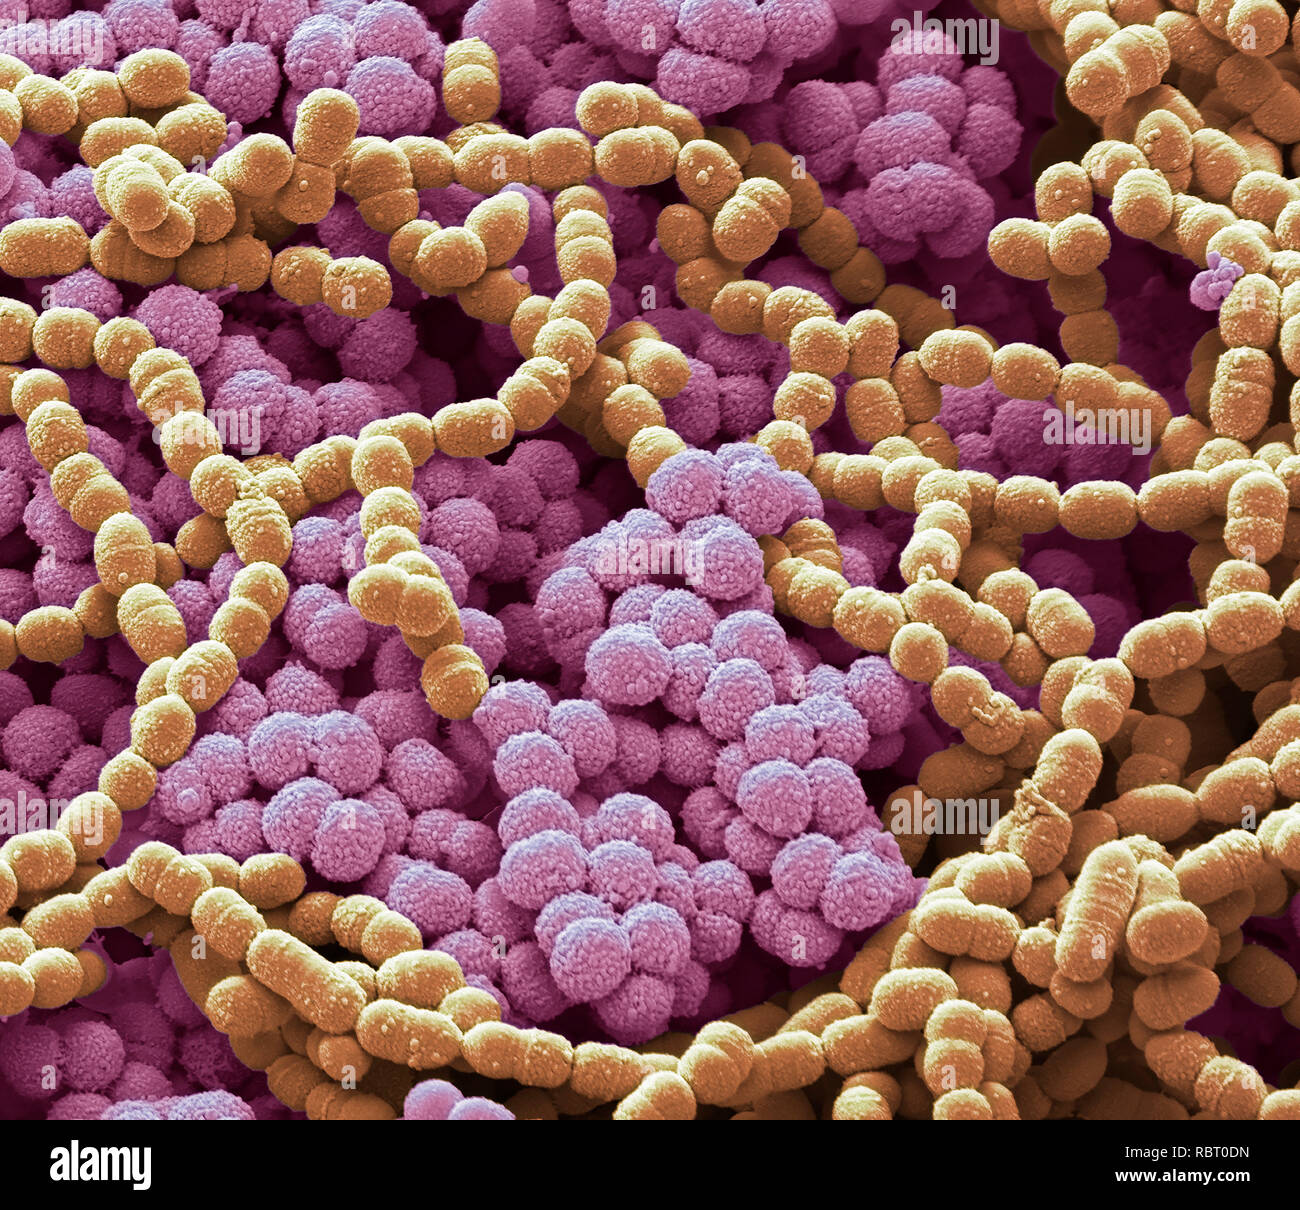 Sputum. Scanning electron micrograph (SEM) of a bacterial culture from sputum. Phlegm is a secretion in the airway during disease and inflammation. Ph Stock Photo